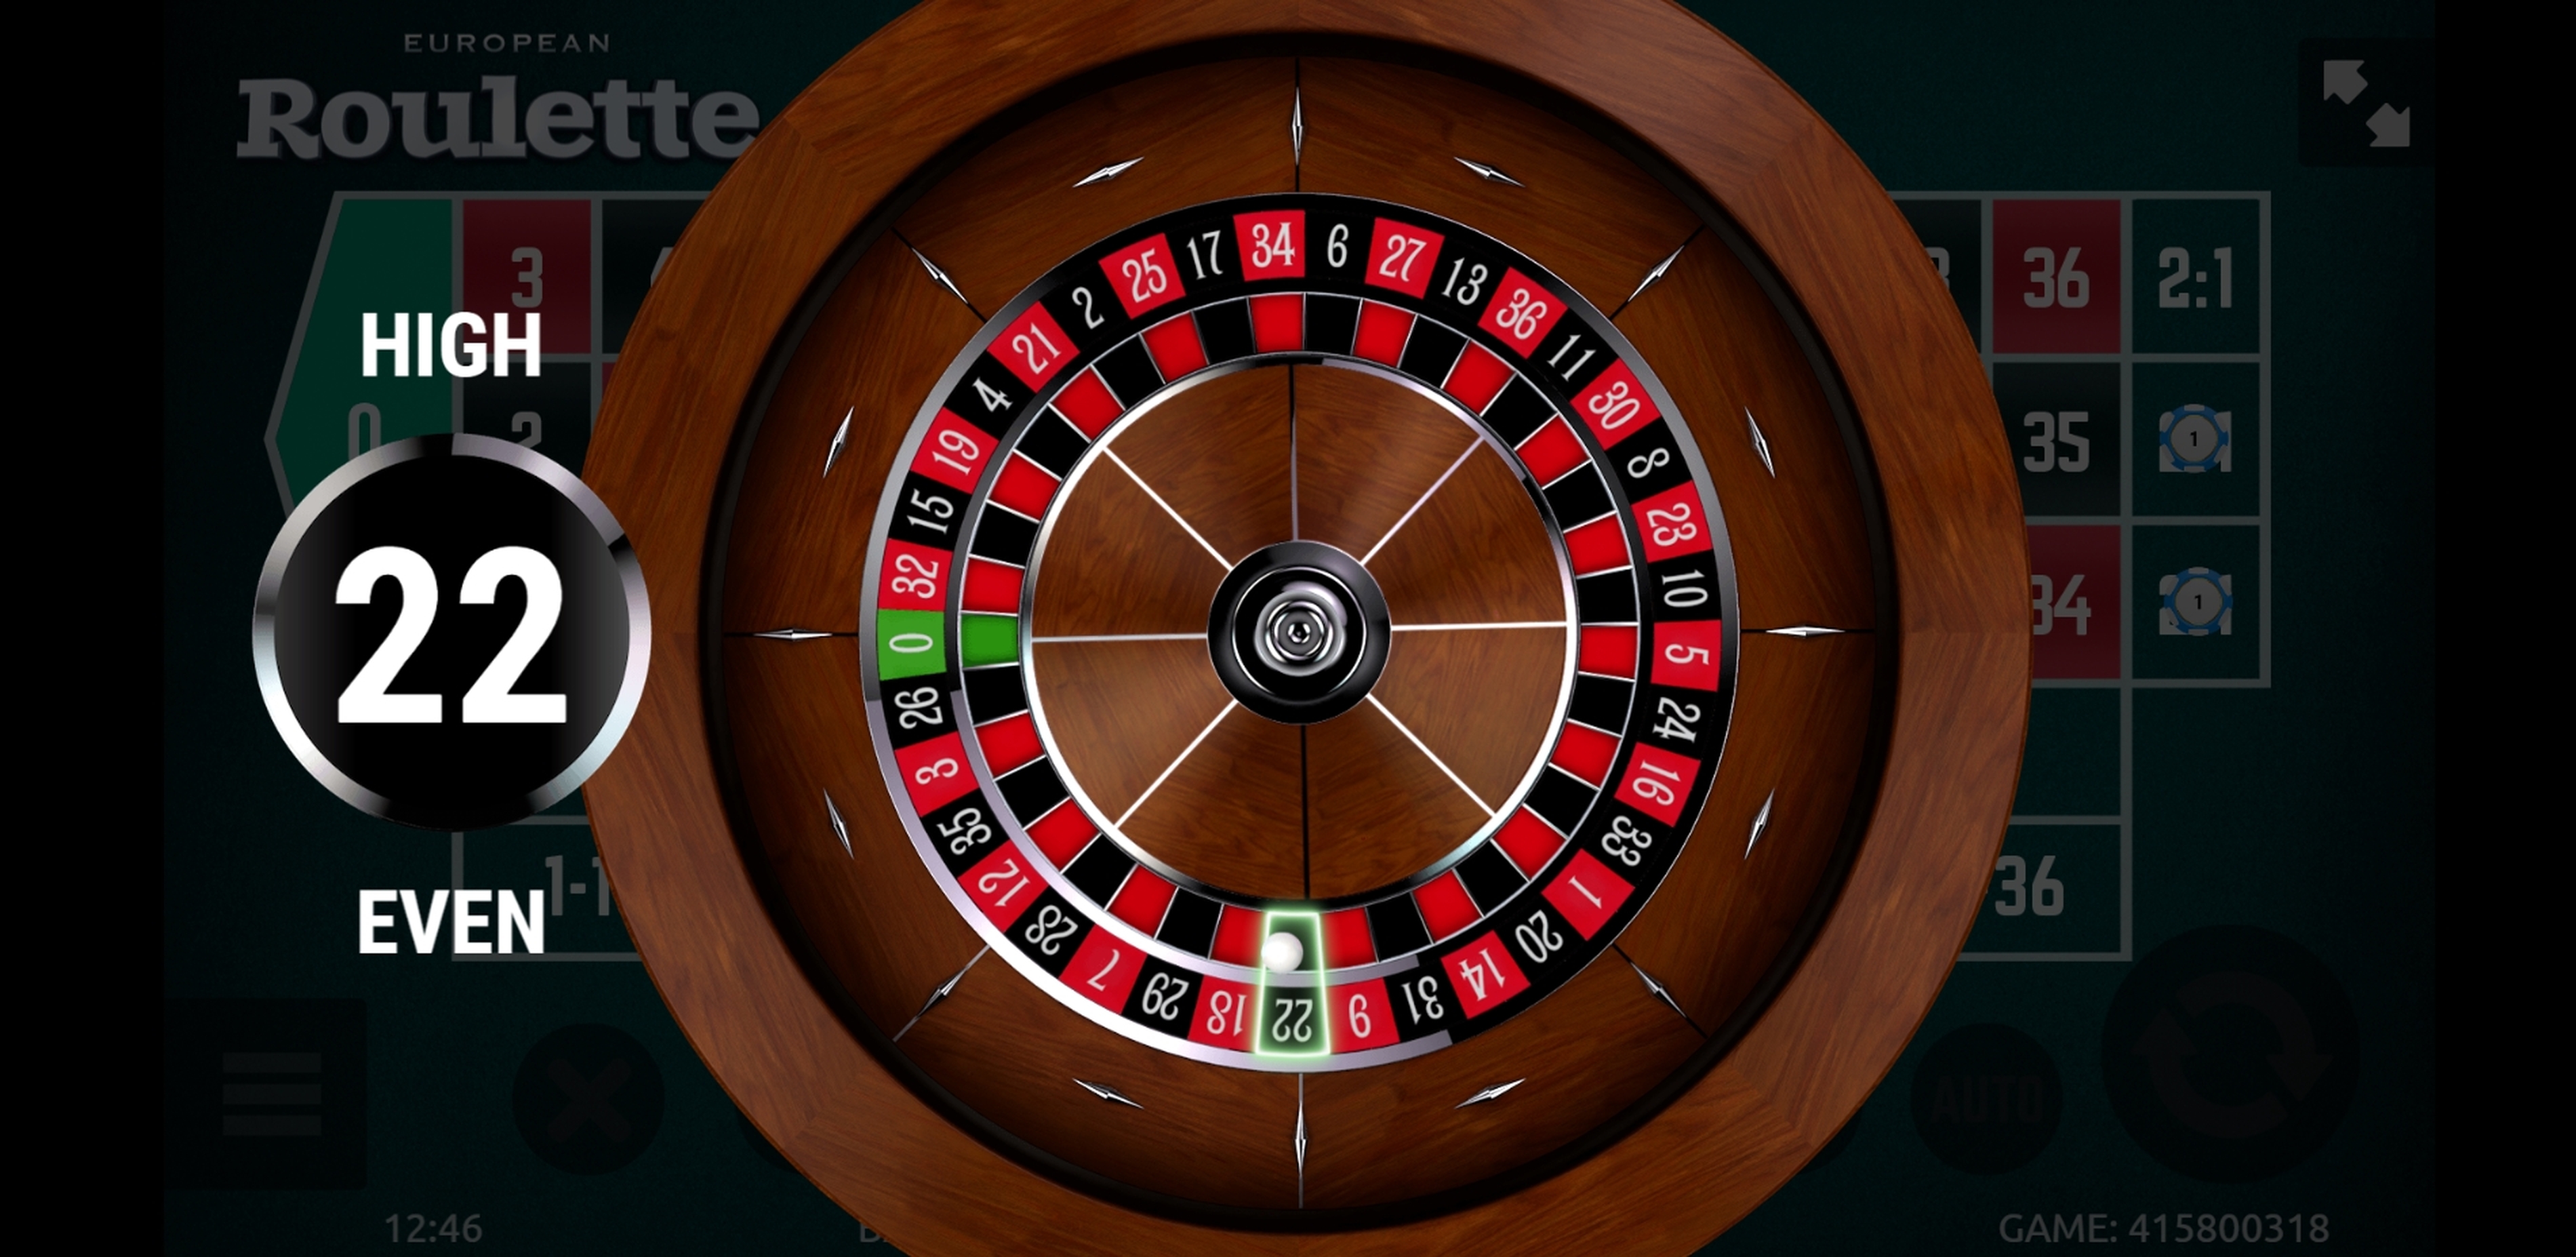 European Roulette | RTG | Play Table Games Online for Free or ...